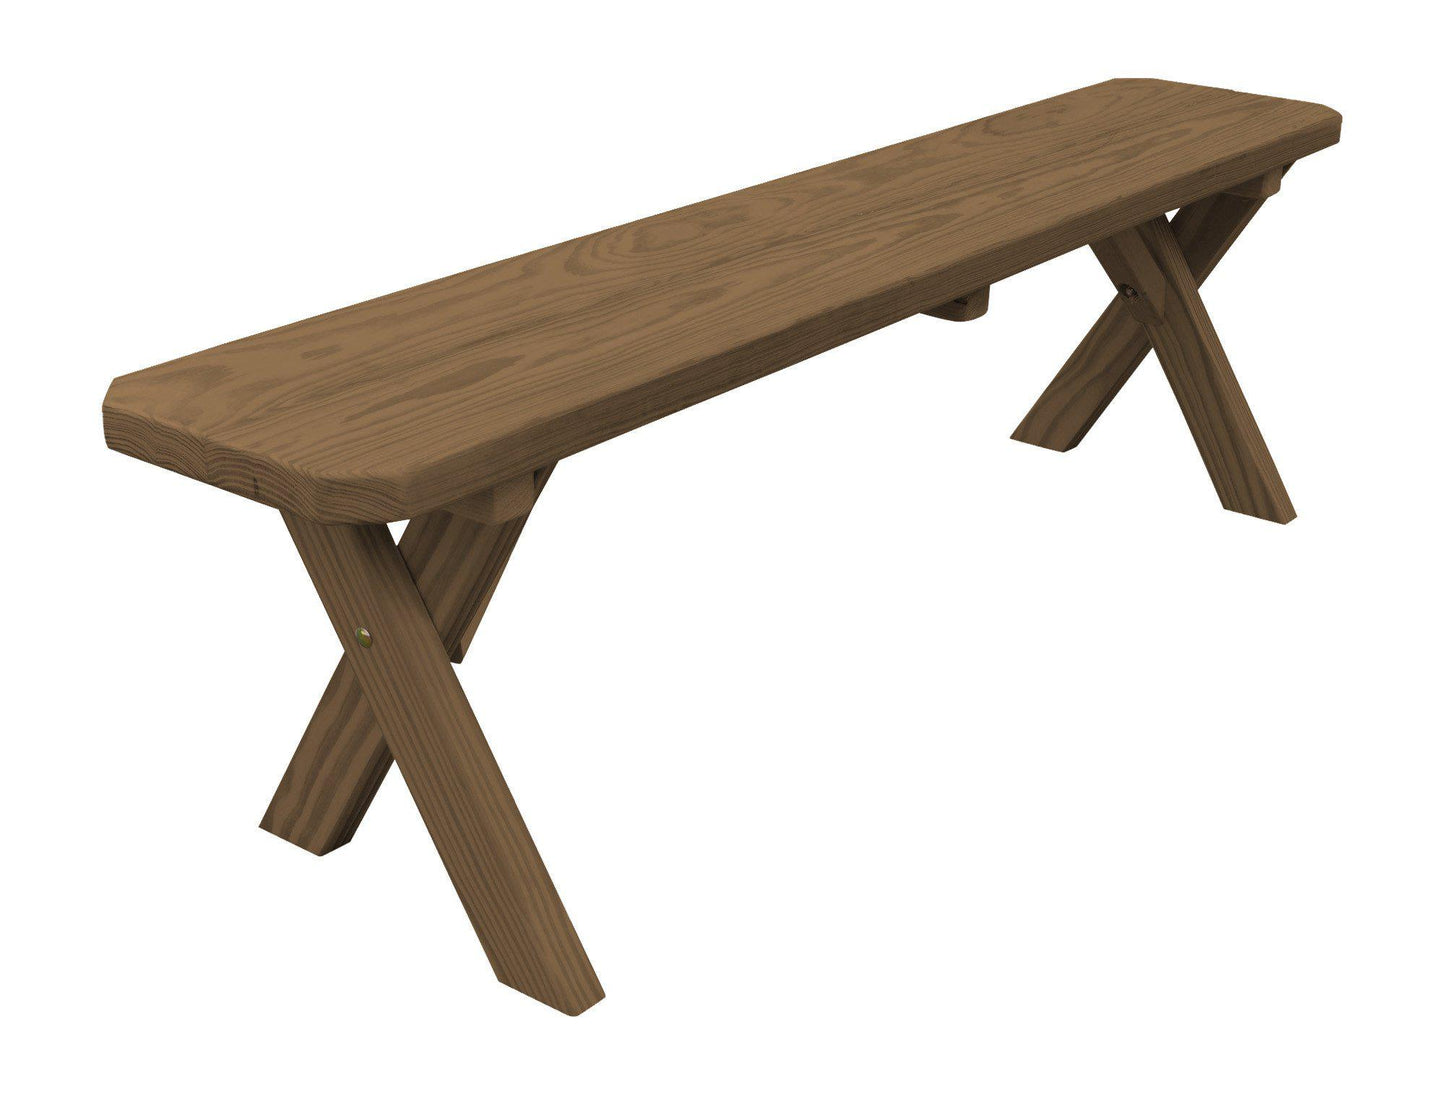 A&L Furniture Co. Yellow Pine 55" Crossleg Bench Only - LEAD TIME TO SHIP 10 BUSINESS DAYS